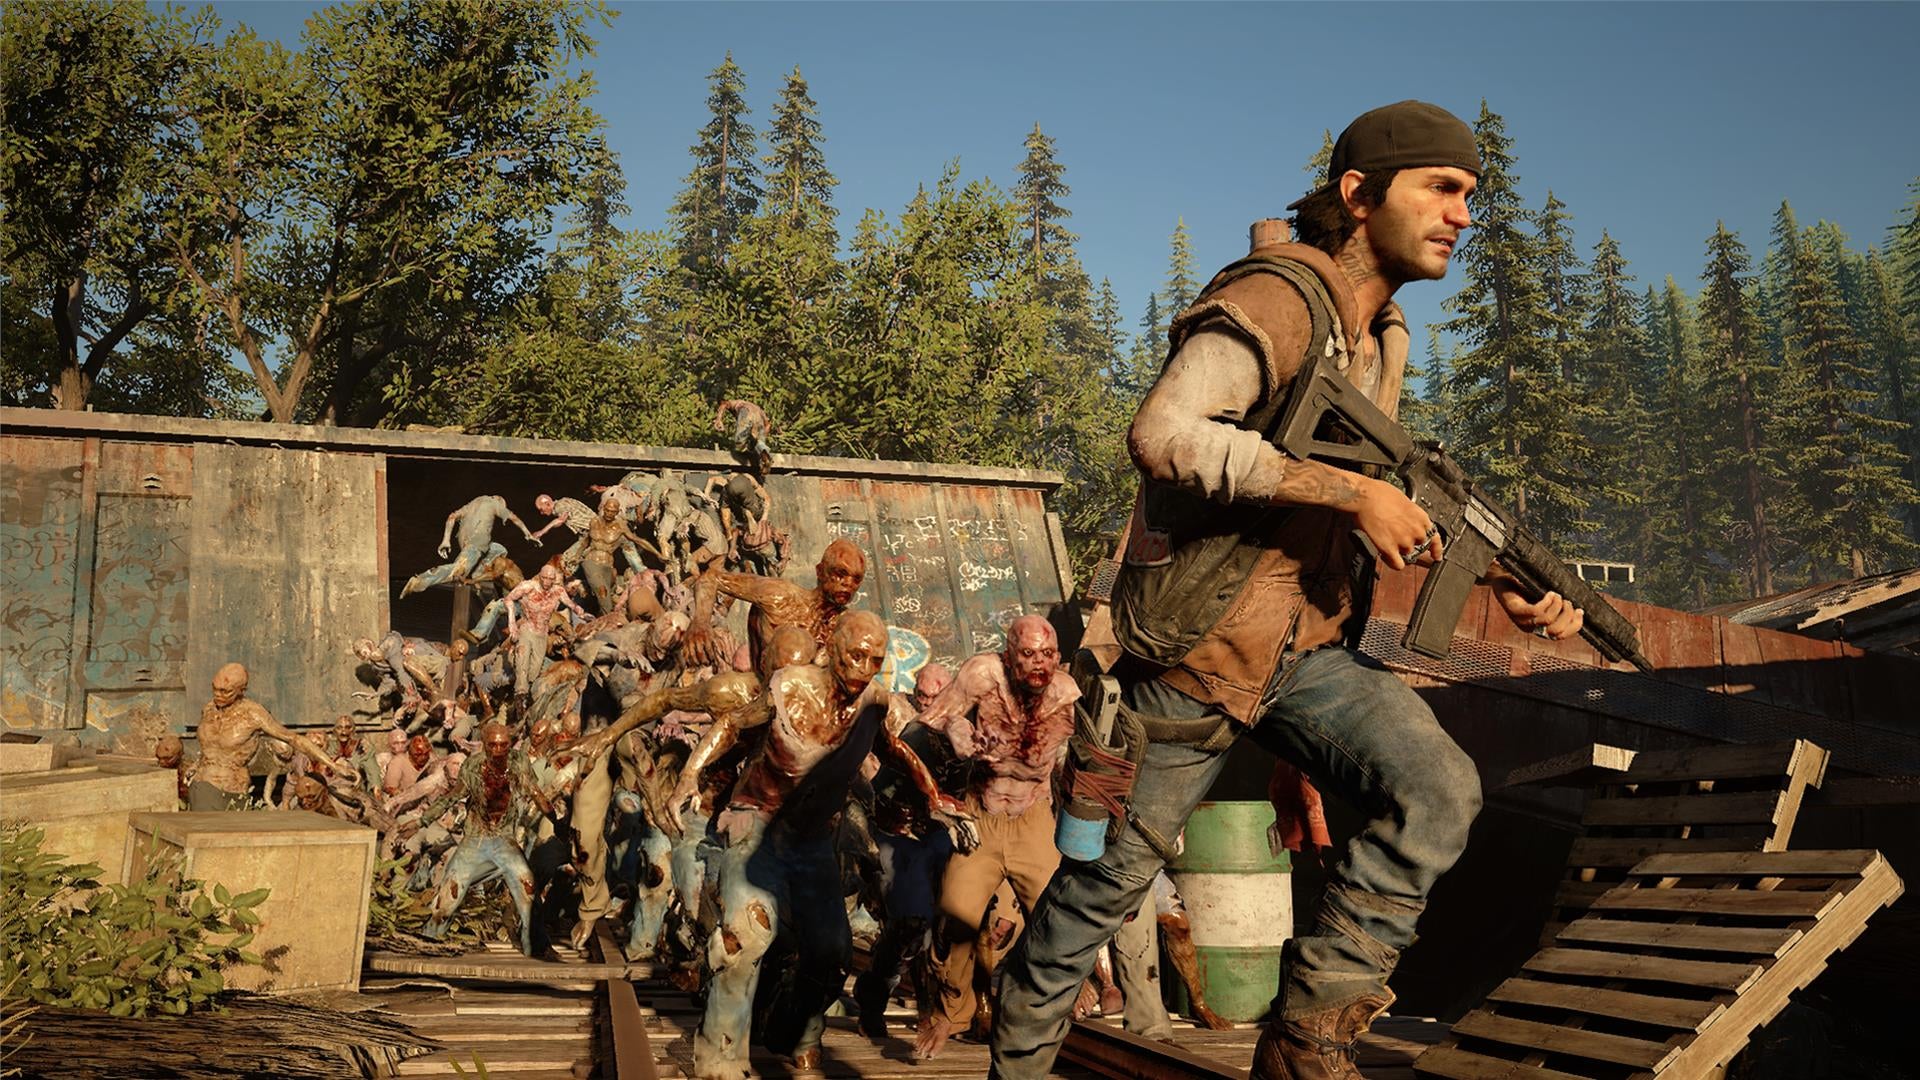 Image for Days Gone will be at E3 "in a big way" this year